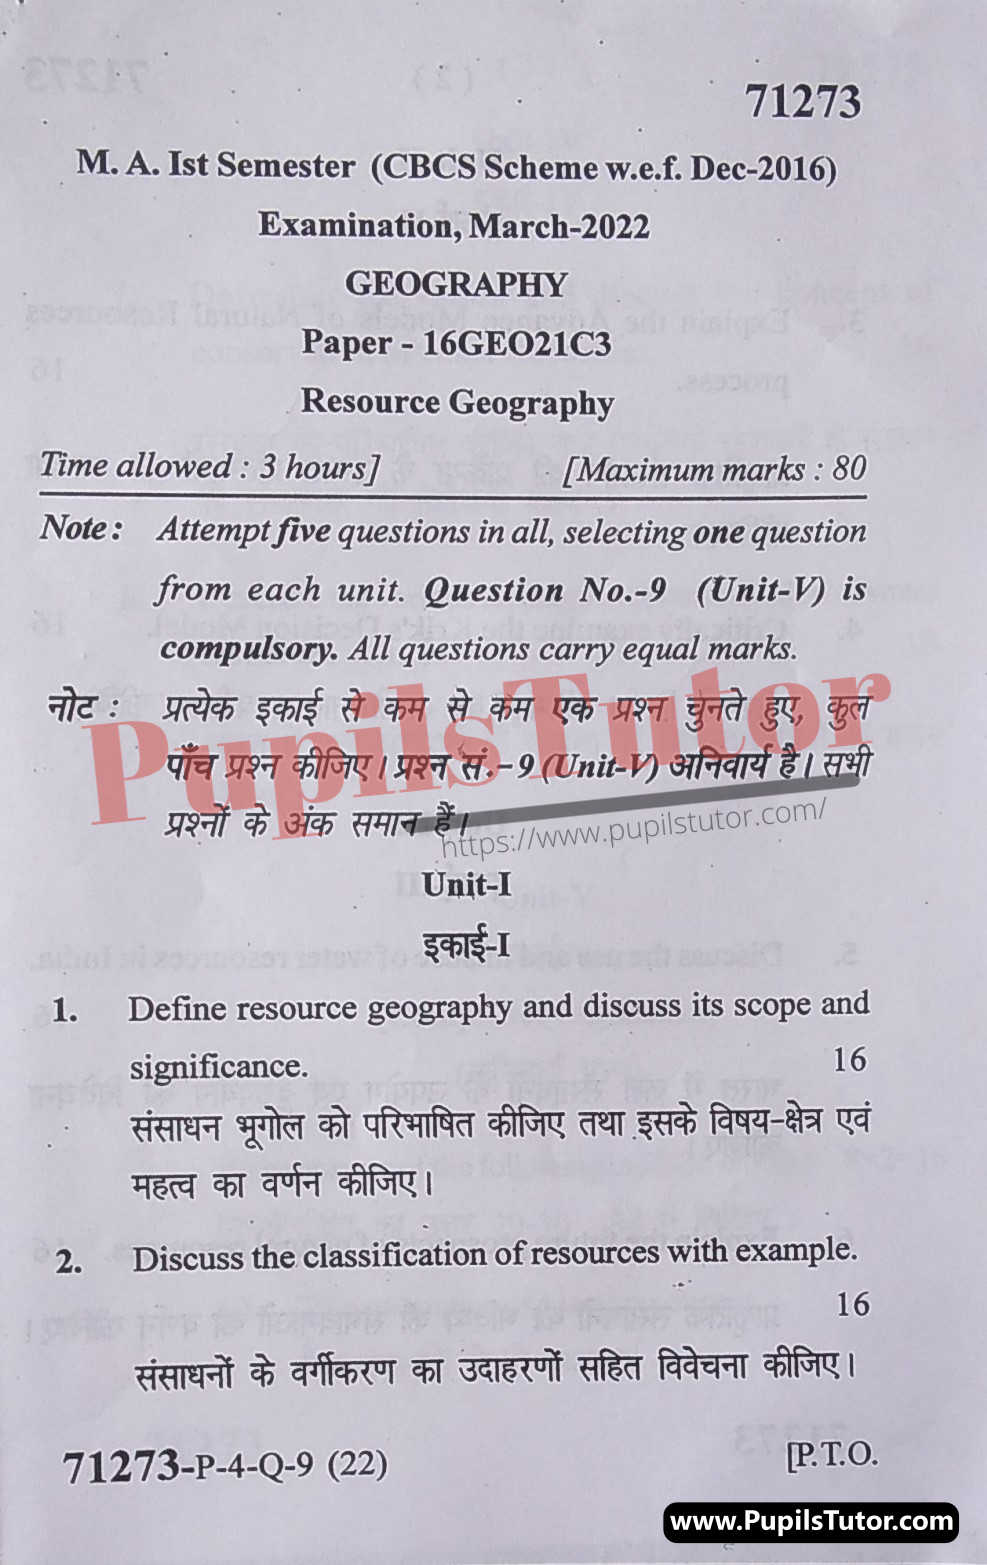 MDU (Maharshi Dayanand University, Rohtak Haryana) MA Geography CBCS Scheme First Semester Previous Year Resource Geography Question Paper For February, 2022 Exam (Question Paper Page 1) - pupilstutor.com